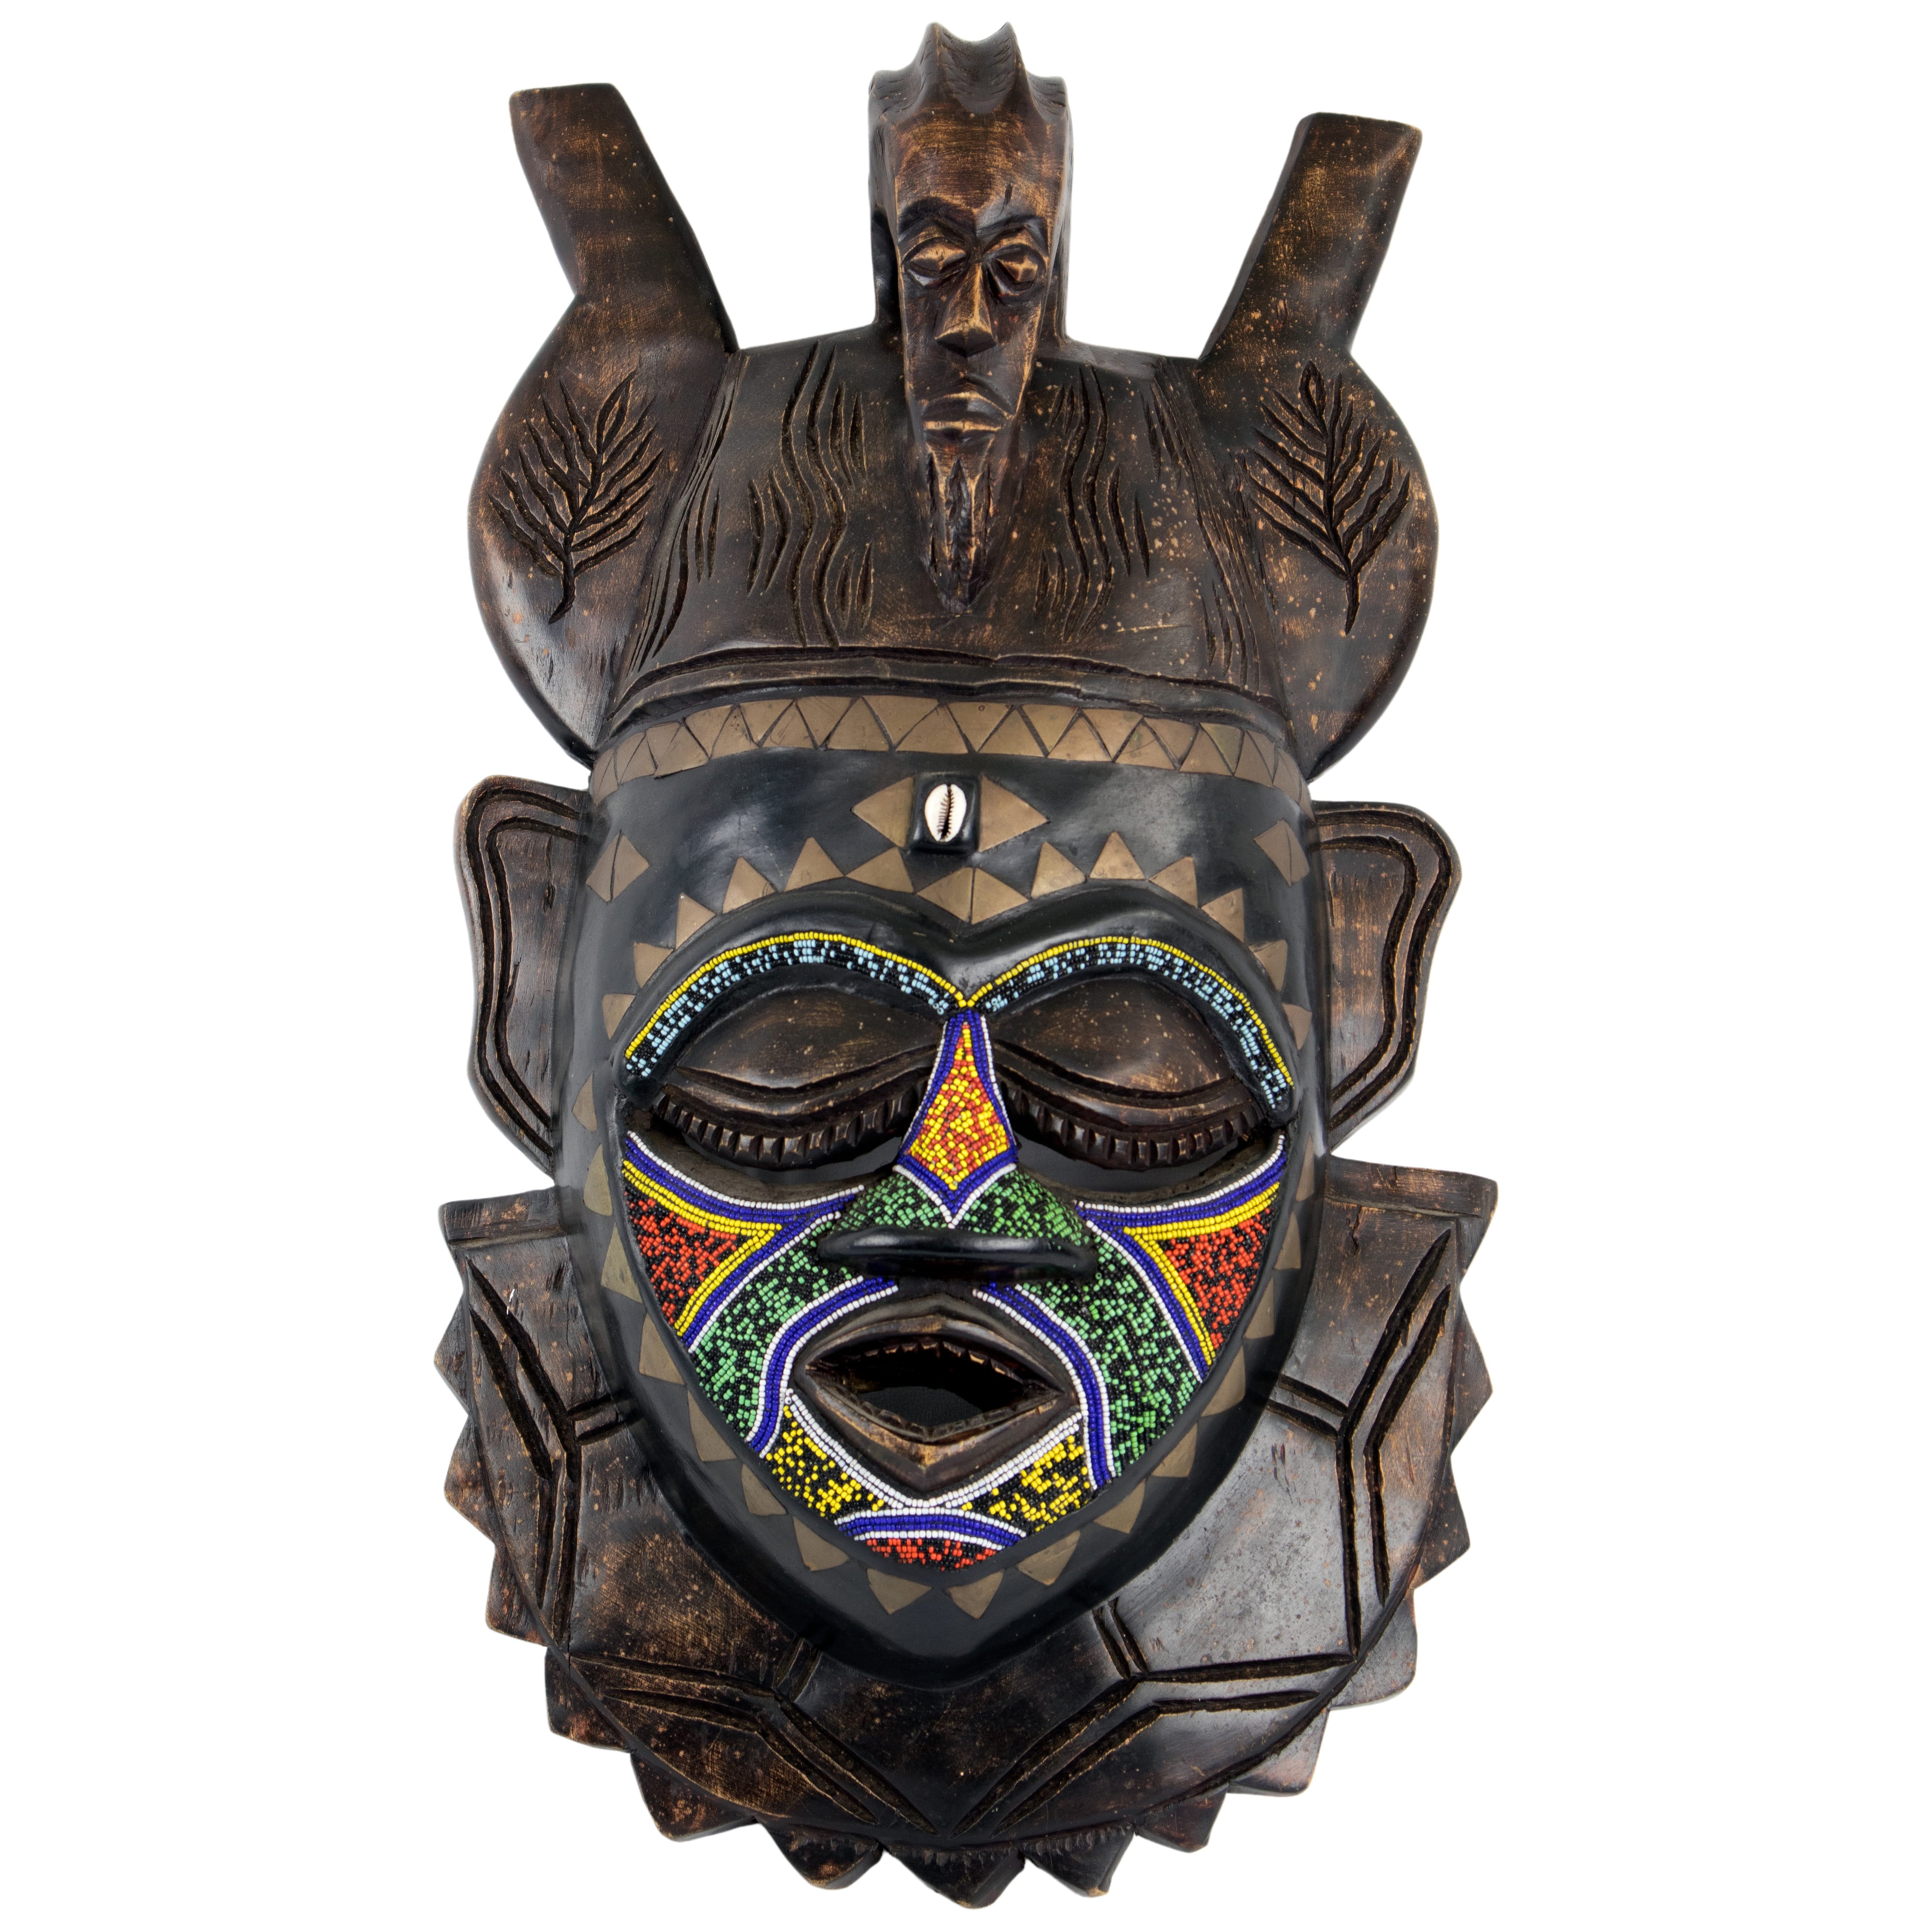 Ashanti Tribal Mask - The African Art Collection